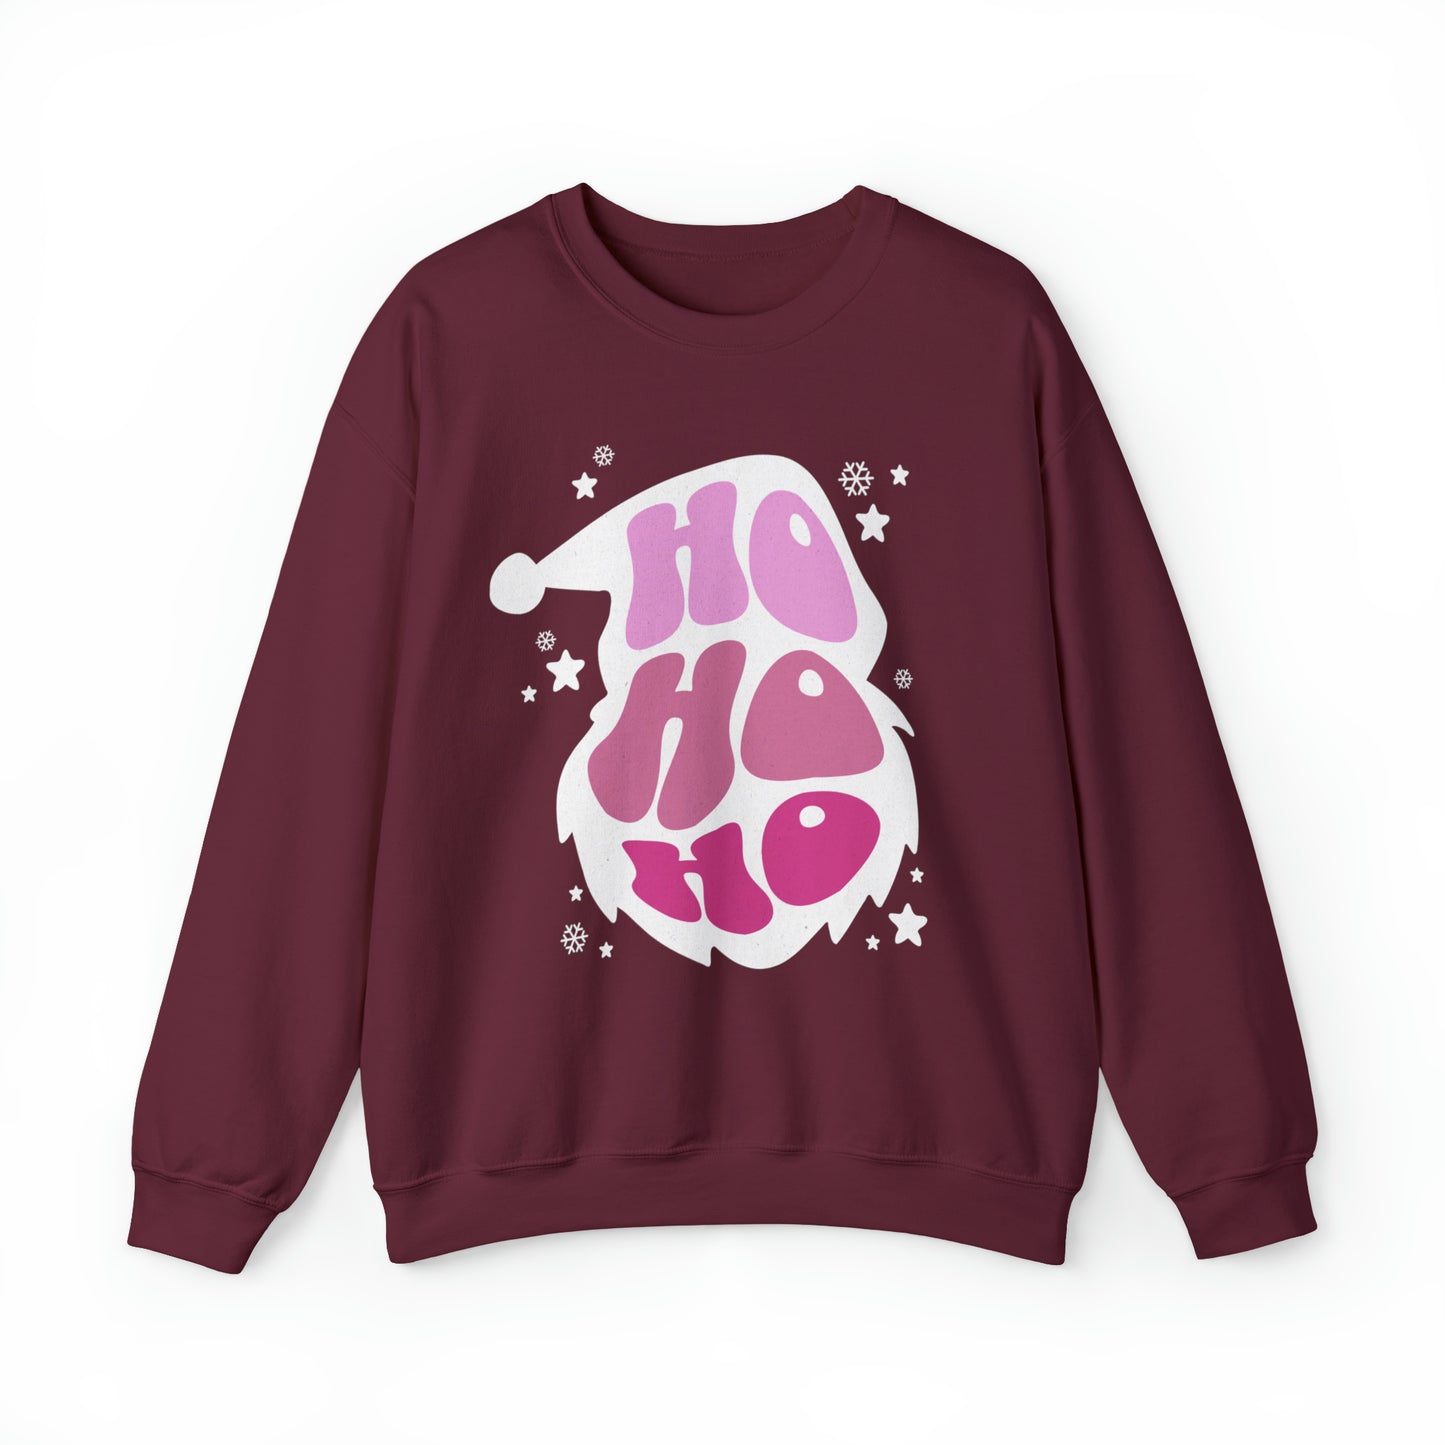 A cozy maroon sweatshirt with the timeless style of Ho Ho Ho Santa Outline Pink Holiday Sweatshirt - Cozy Crewneck - Festive Christmas Sweater from Printify written on it.